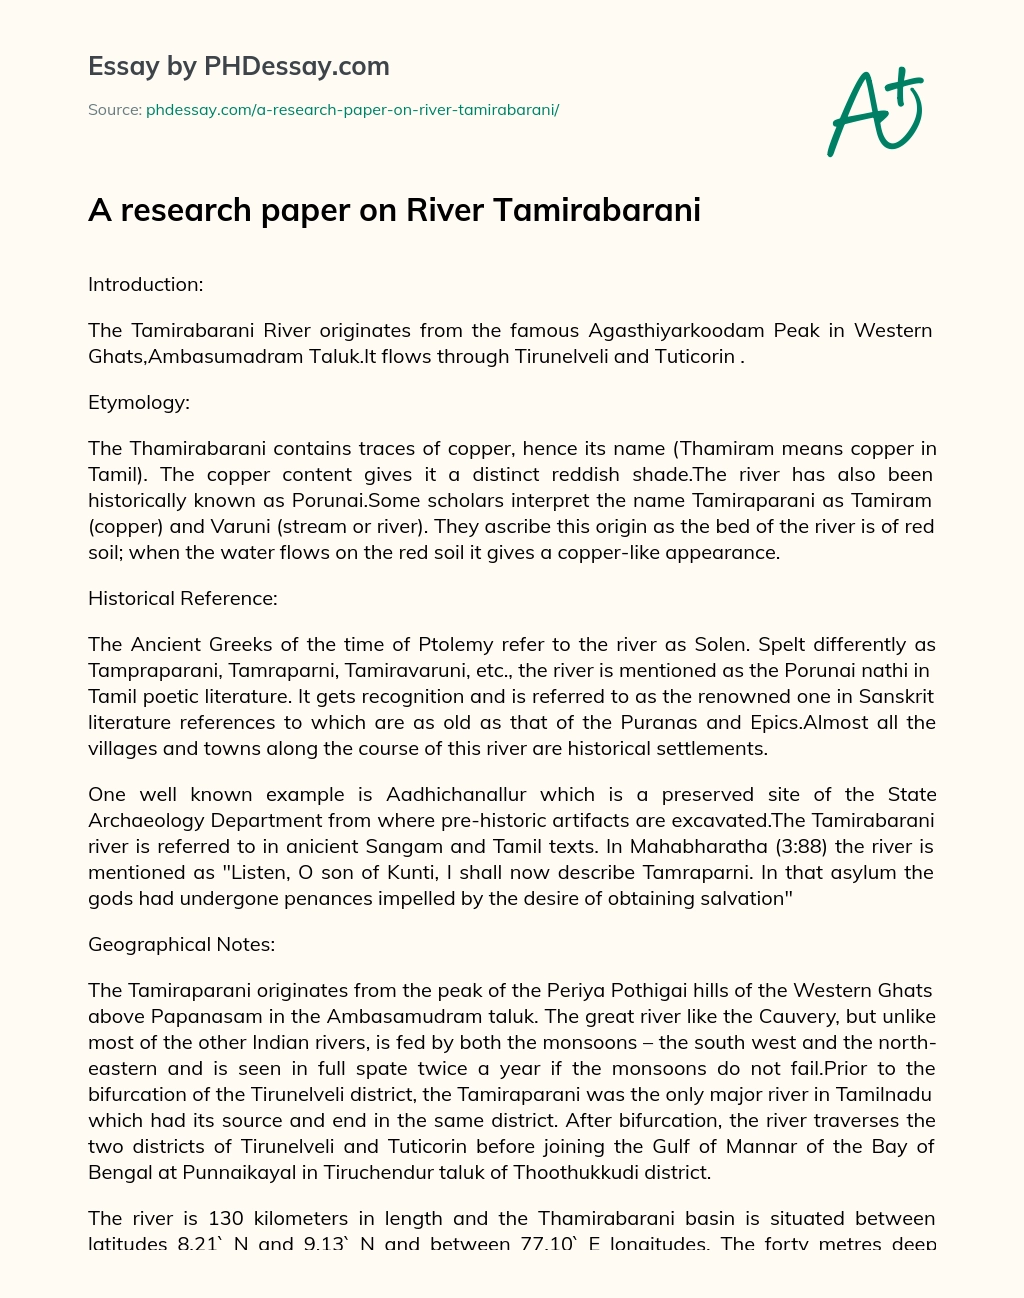 A research paper on River Tamirabarani essay